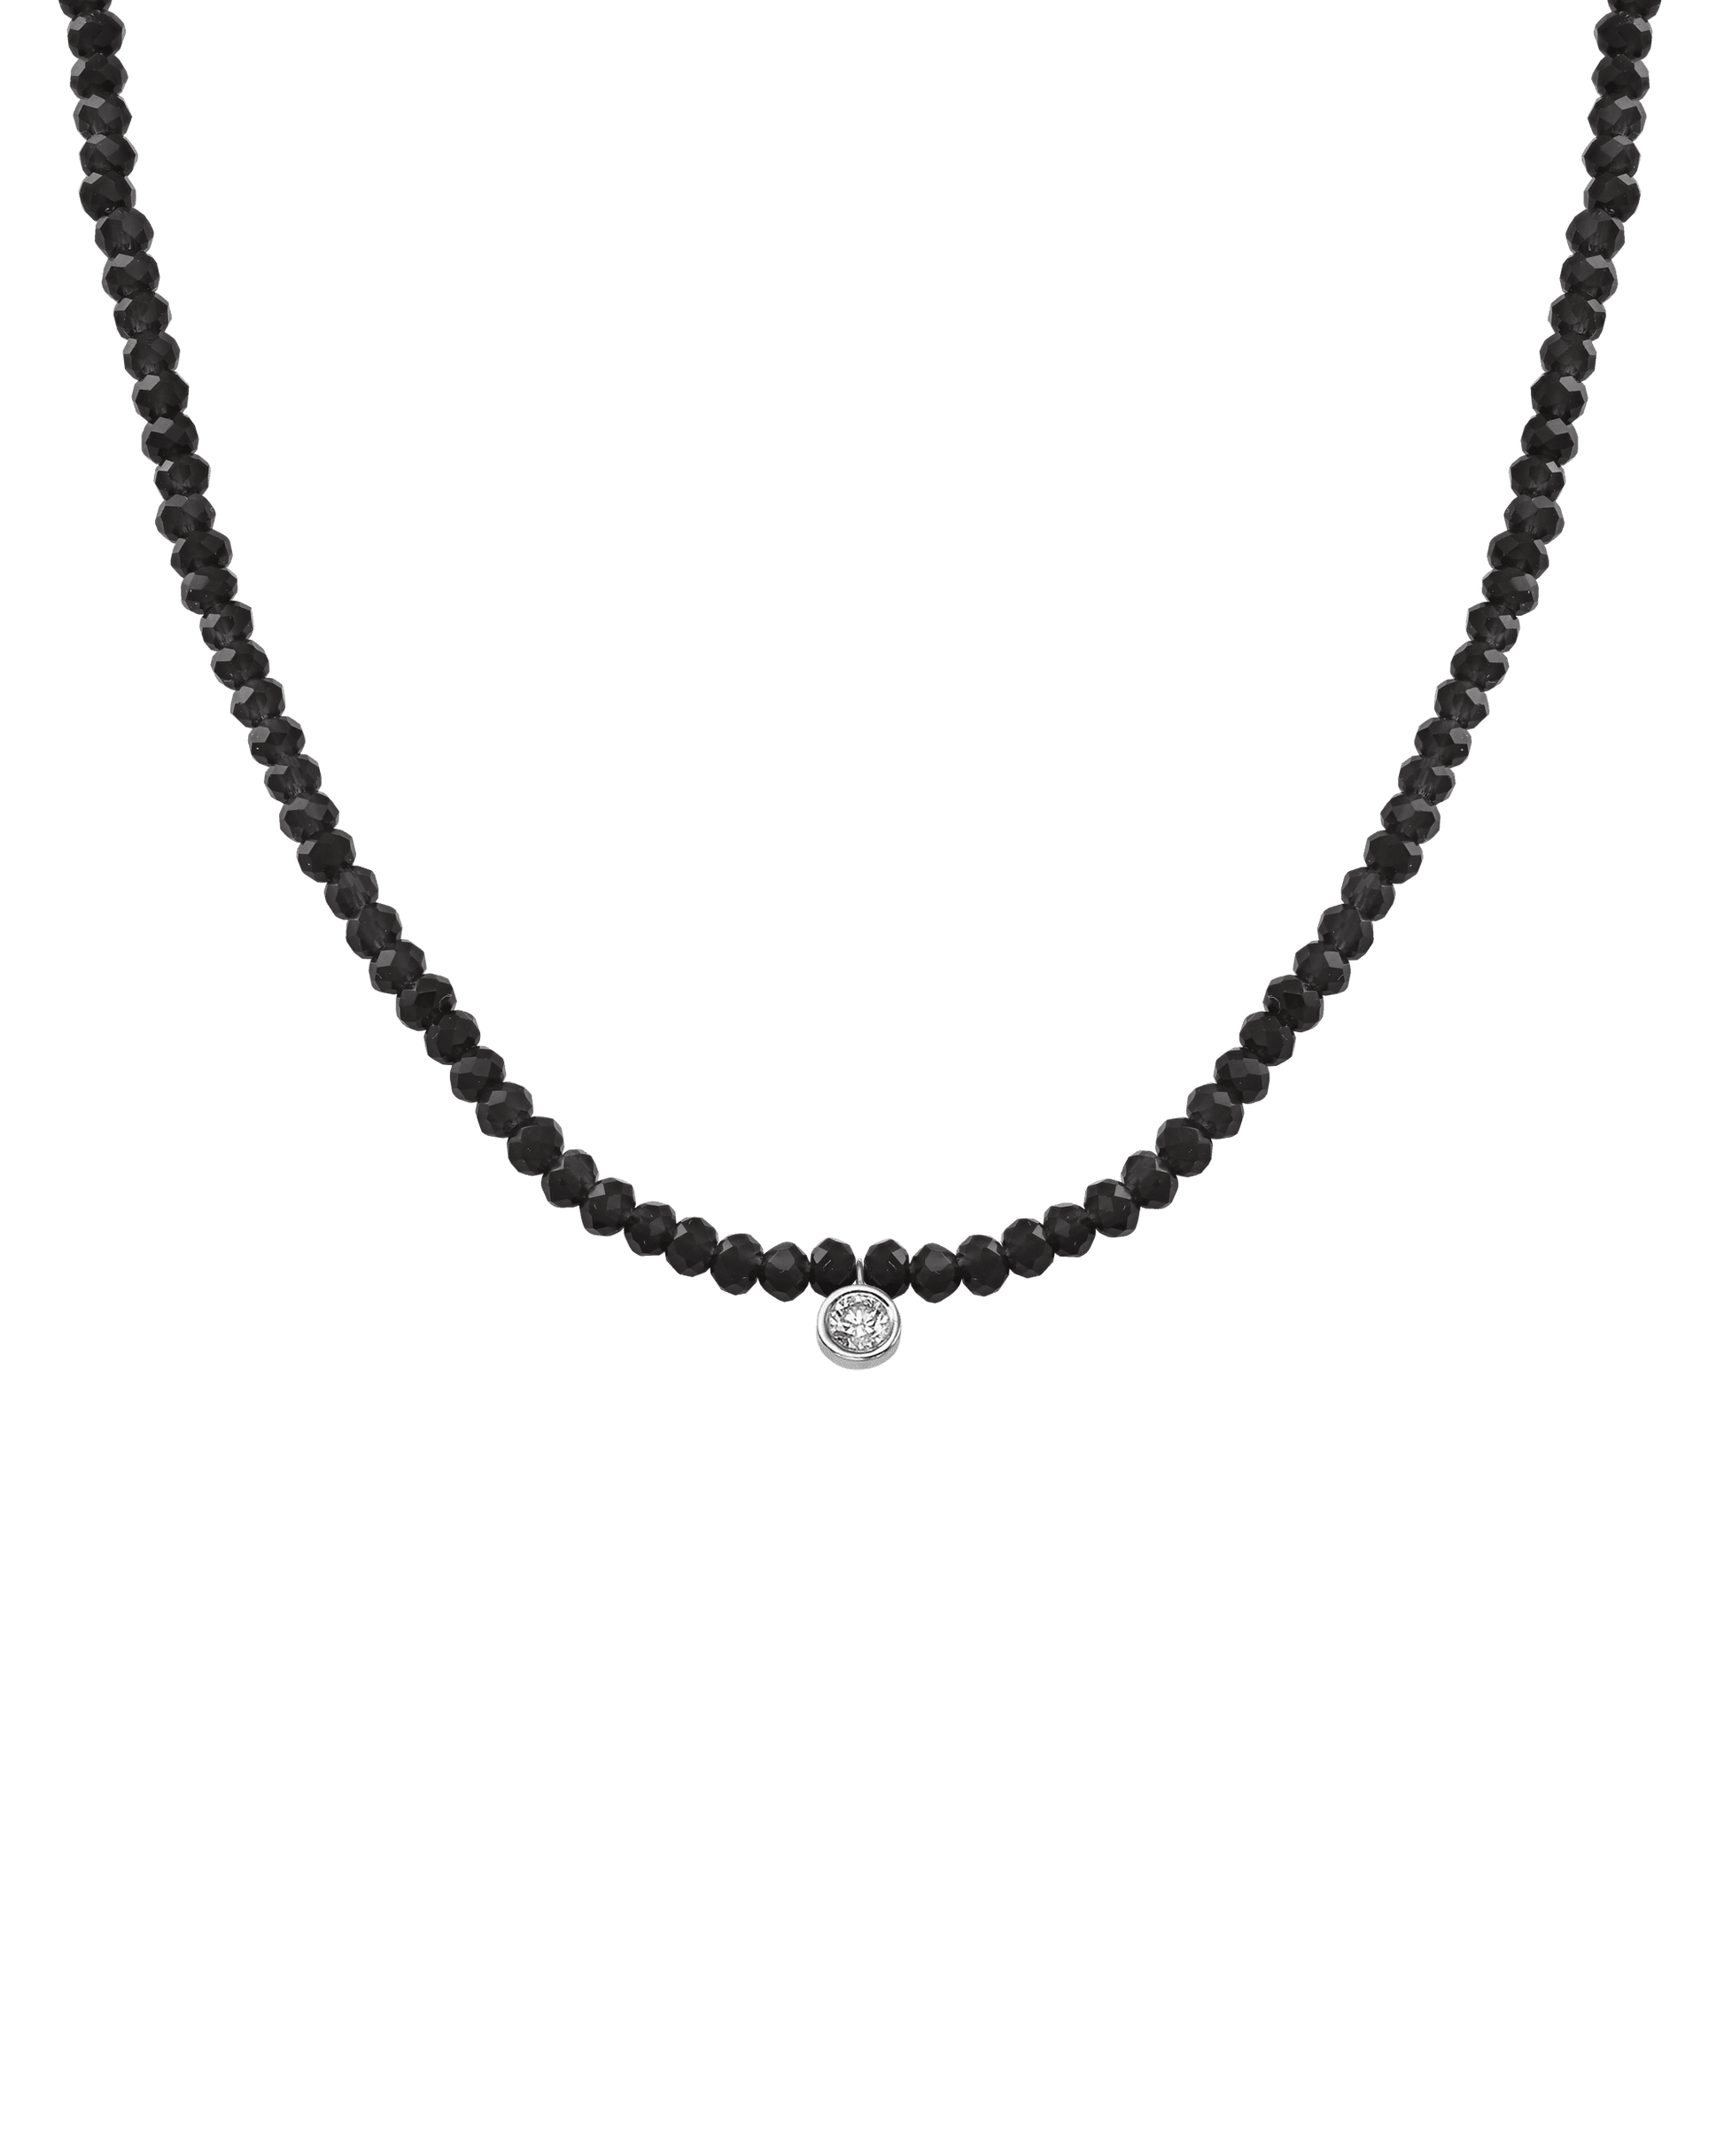 The Gemstone & Diamond Necklace - 14K White Gold Necklaces 14K Solid Gold Glass Beads Black Spinnel Large: 0.1ct 14"